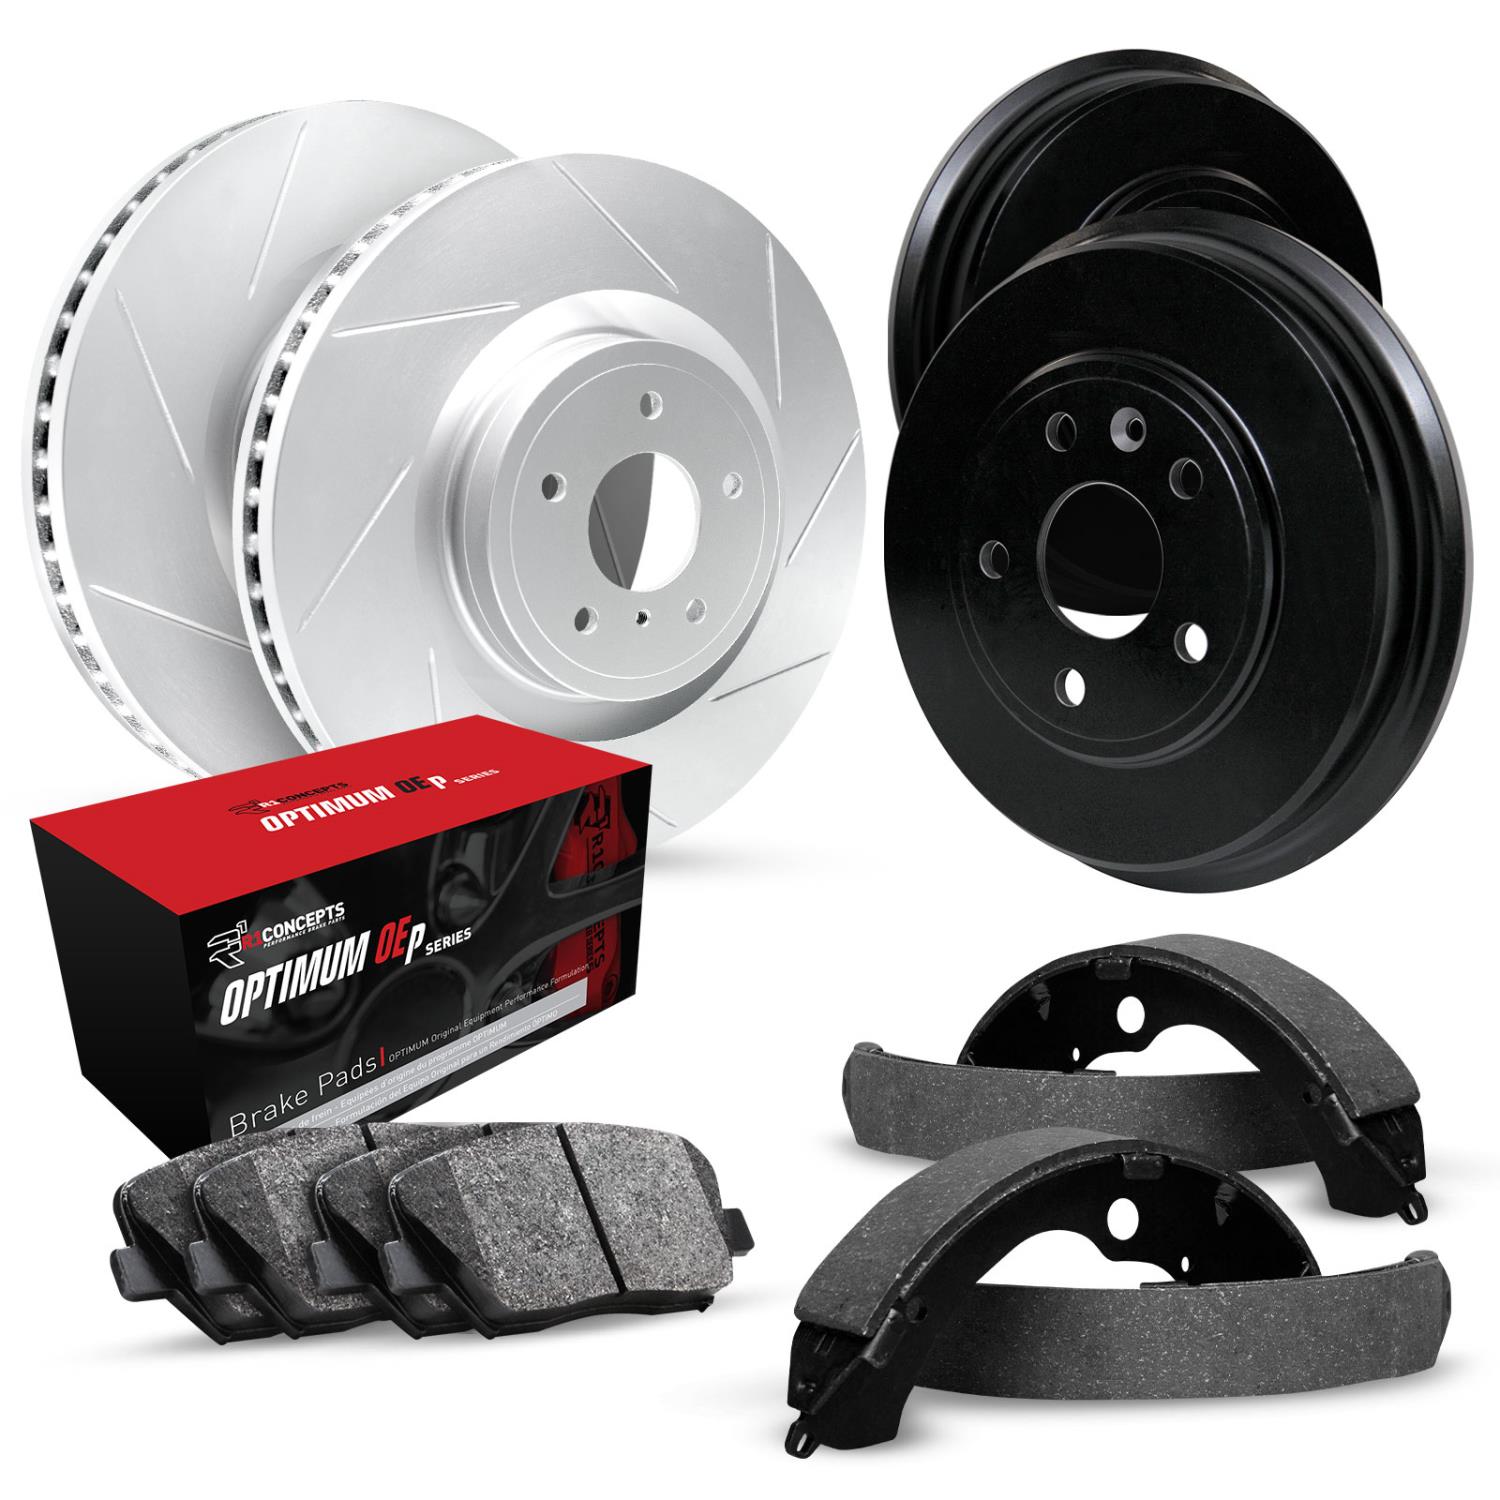 GEO-Carbon Slotted Brake Rotor & Drum Set w/Optimum OE Pads & Shoes, 2006-2012 Fits Multiple Makes/Models